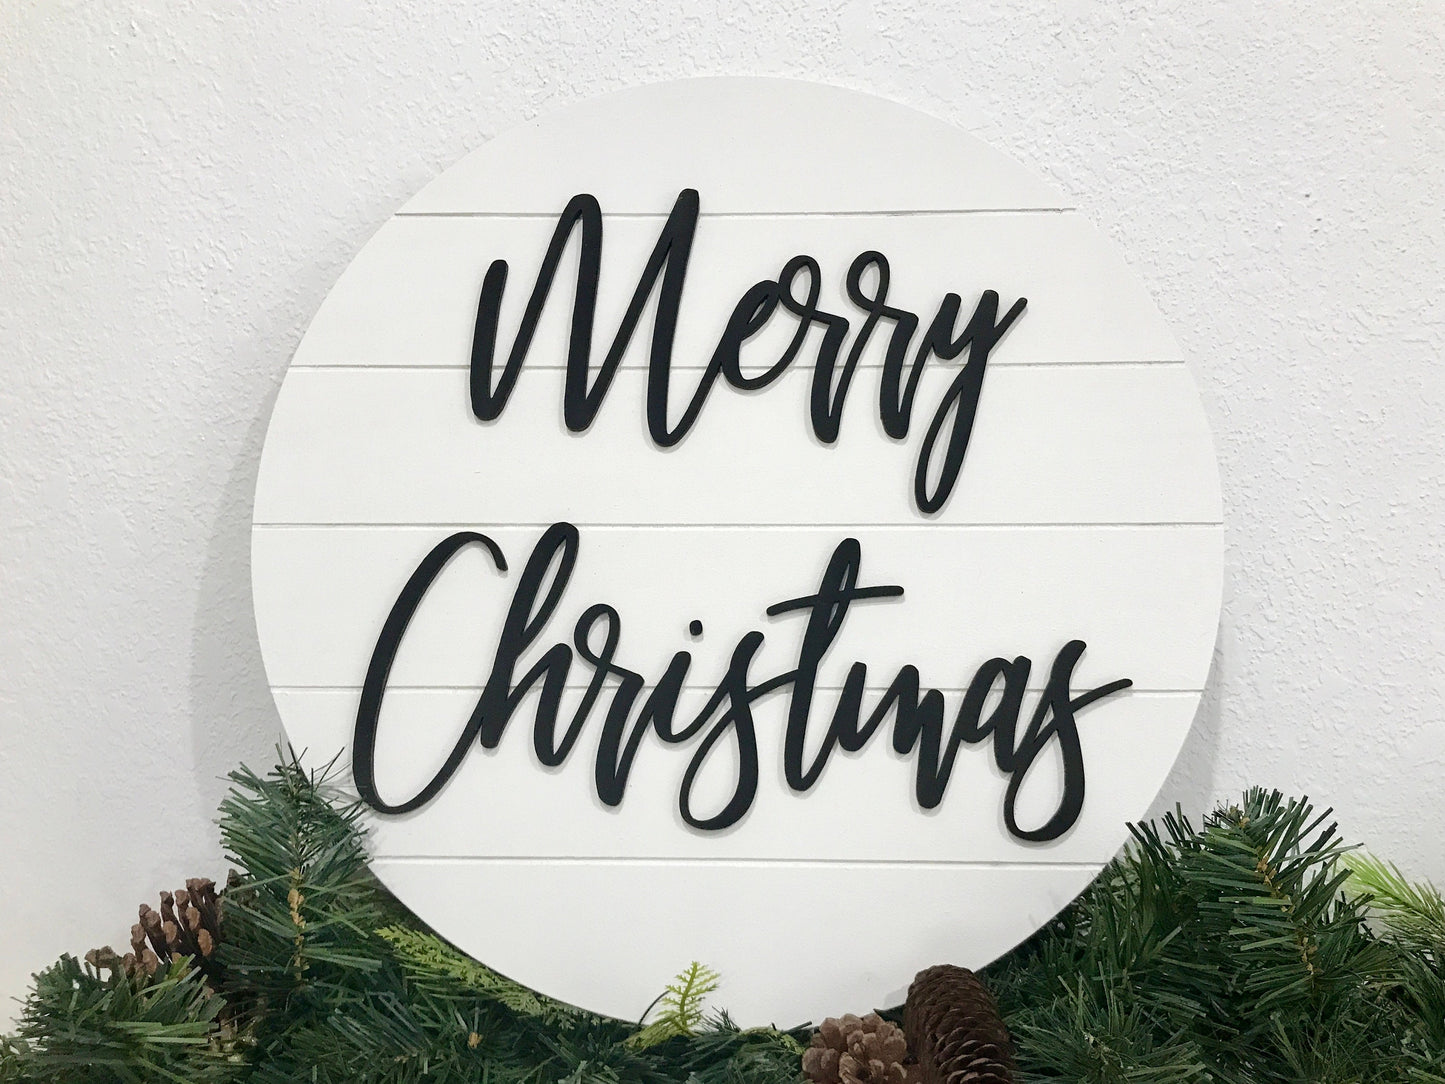 Merry Christmas sign, Christmas decorations, 3D holiday decor, patio shiplap wood signs, living room wooden sign wall hanging, mantel decor